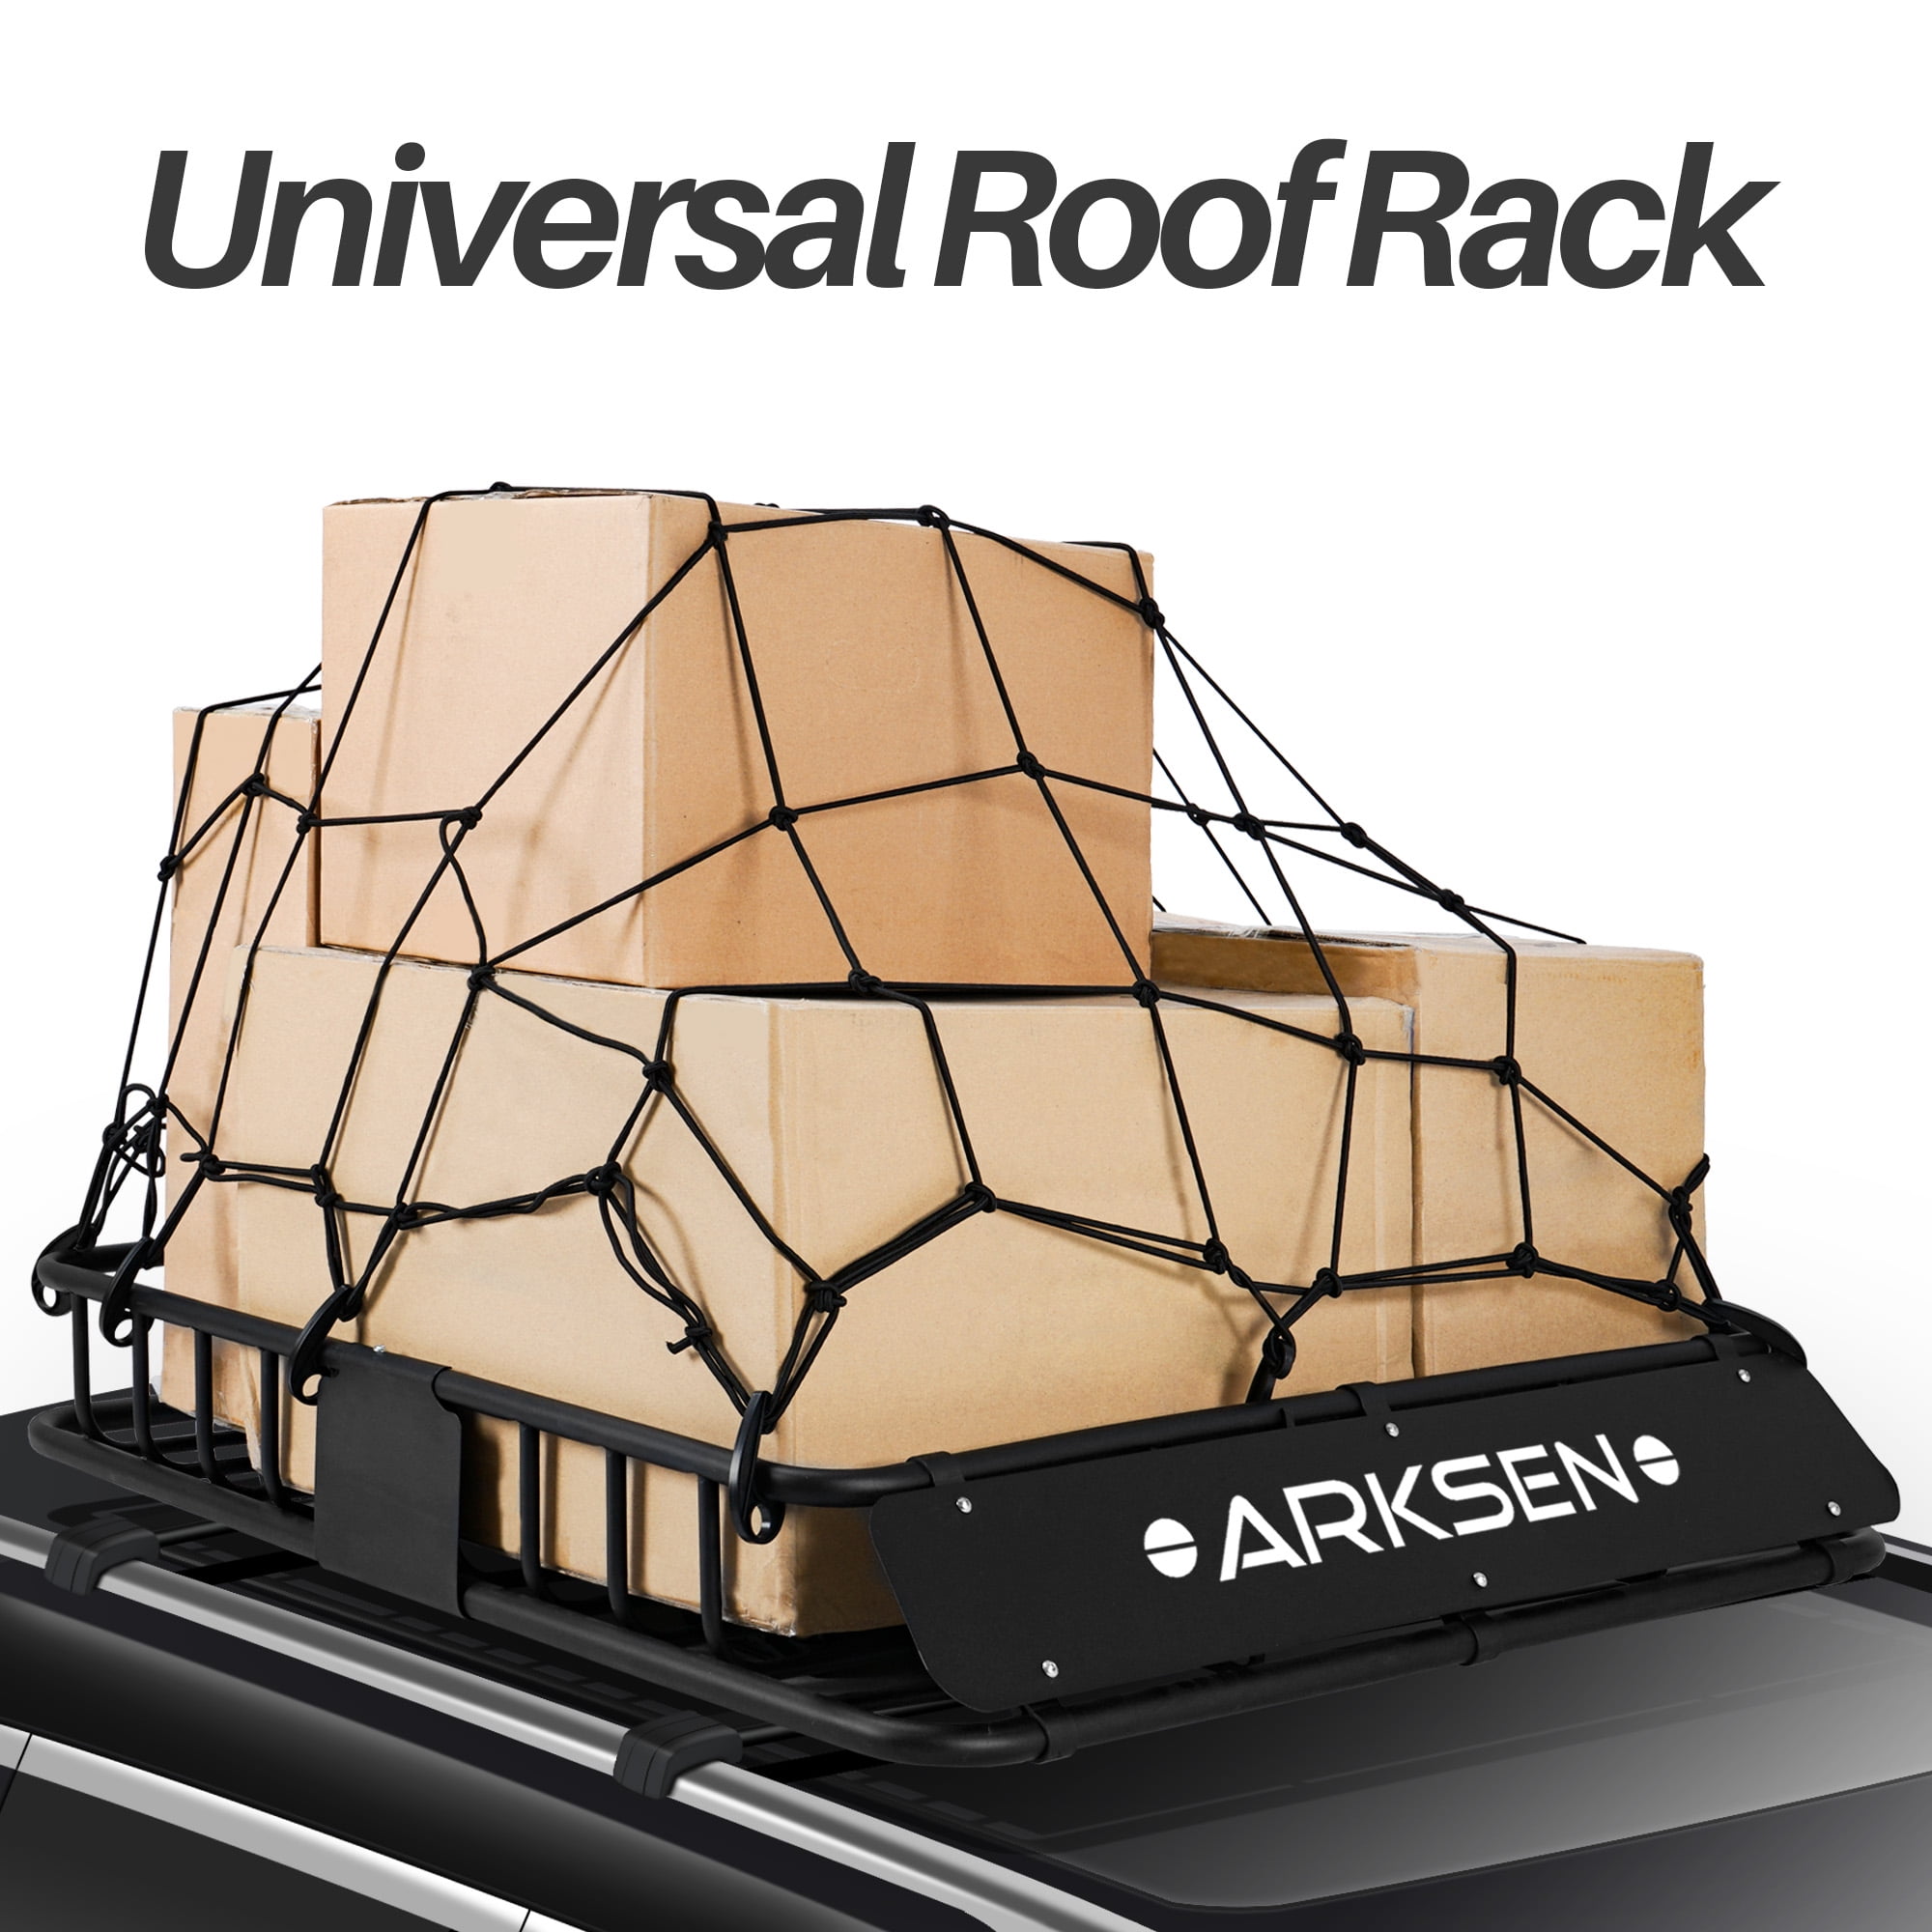 ARKSEN Heavy Duty 43"x 39"x 6" Universal Roof Rack With Cargo Net Top  Carrier 150 lbs Capacity Luggage Basket, Black